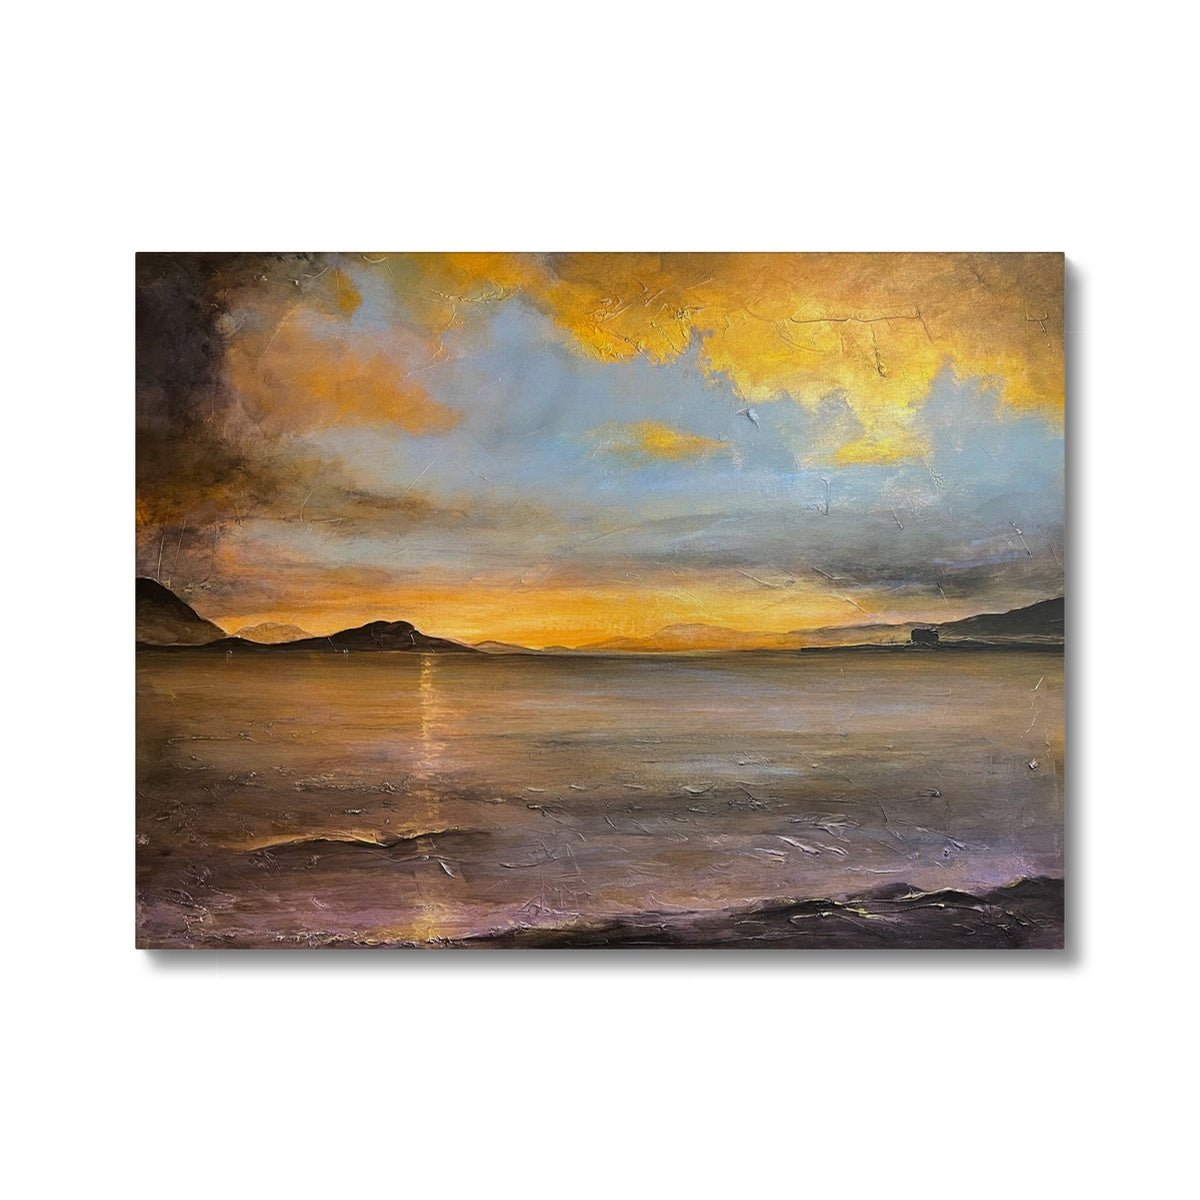 Loch Linnhe Sunset Painting | Canvas From Scotland-Contemporary Stretched Canvas Prints-Scottish Lochs & Mountains Art Gallery-24"x18"-Paintings, Prints, Homeware, Art Gifts From Scotland By Scottish Artist Kevin Hunter